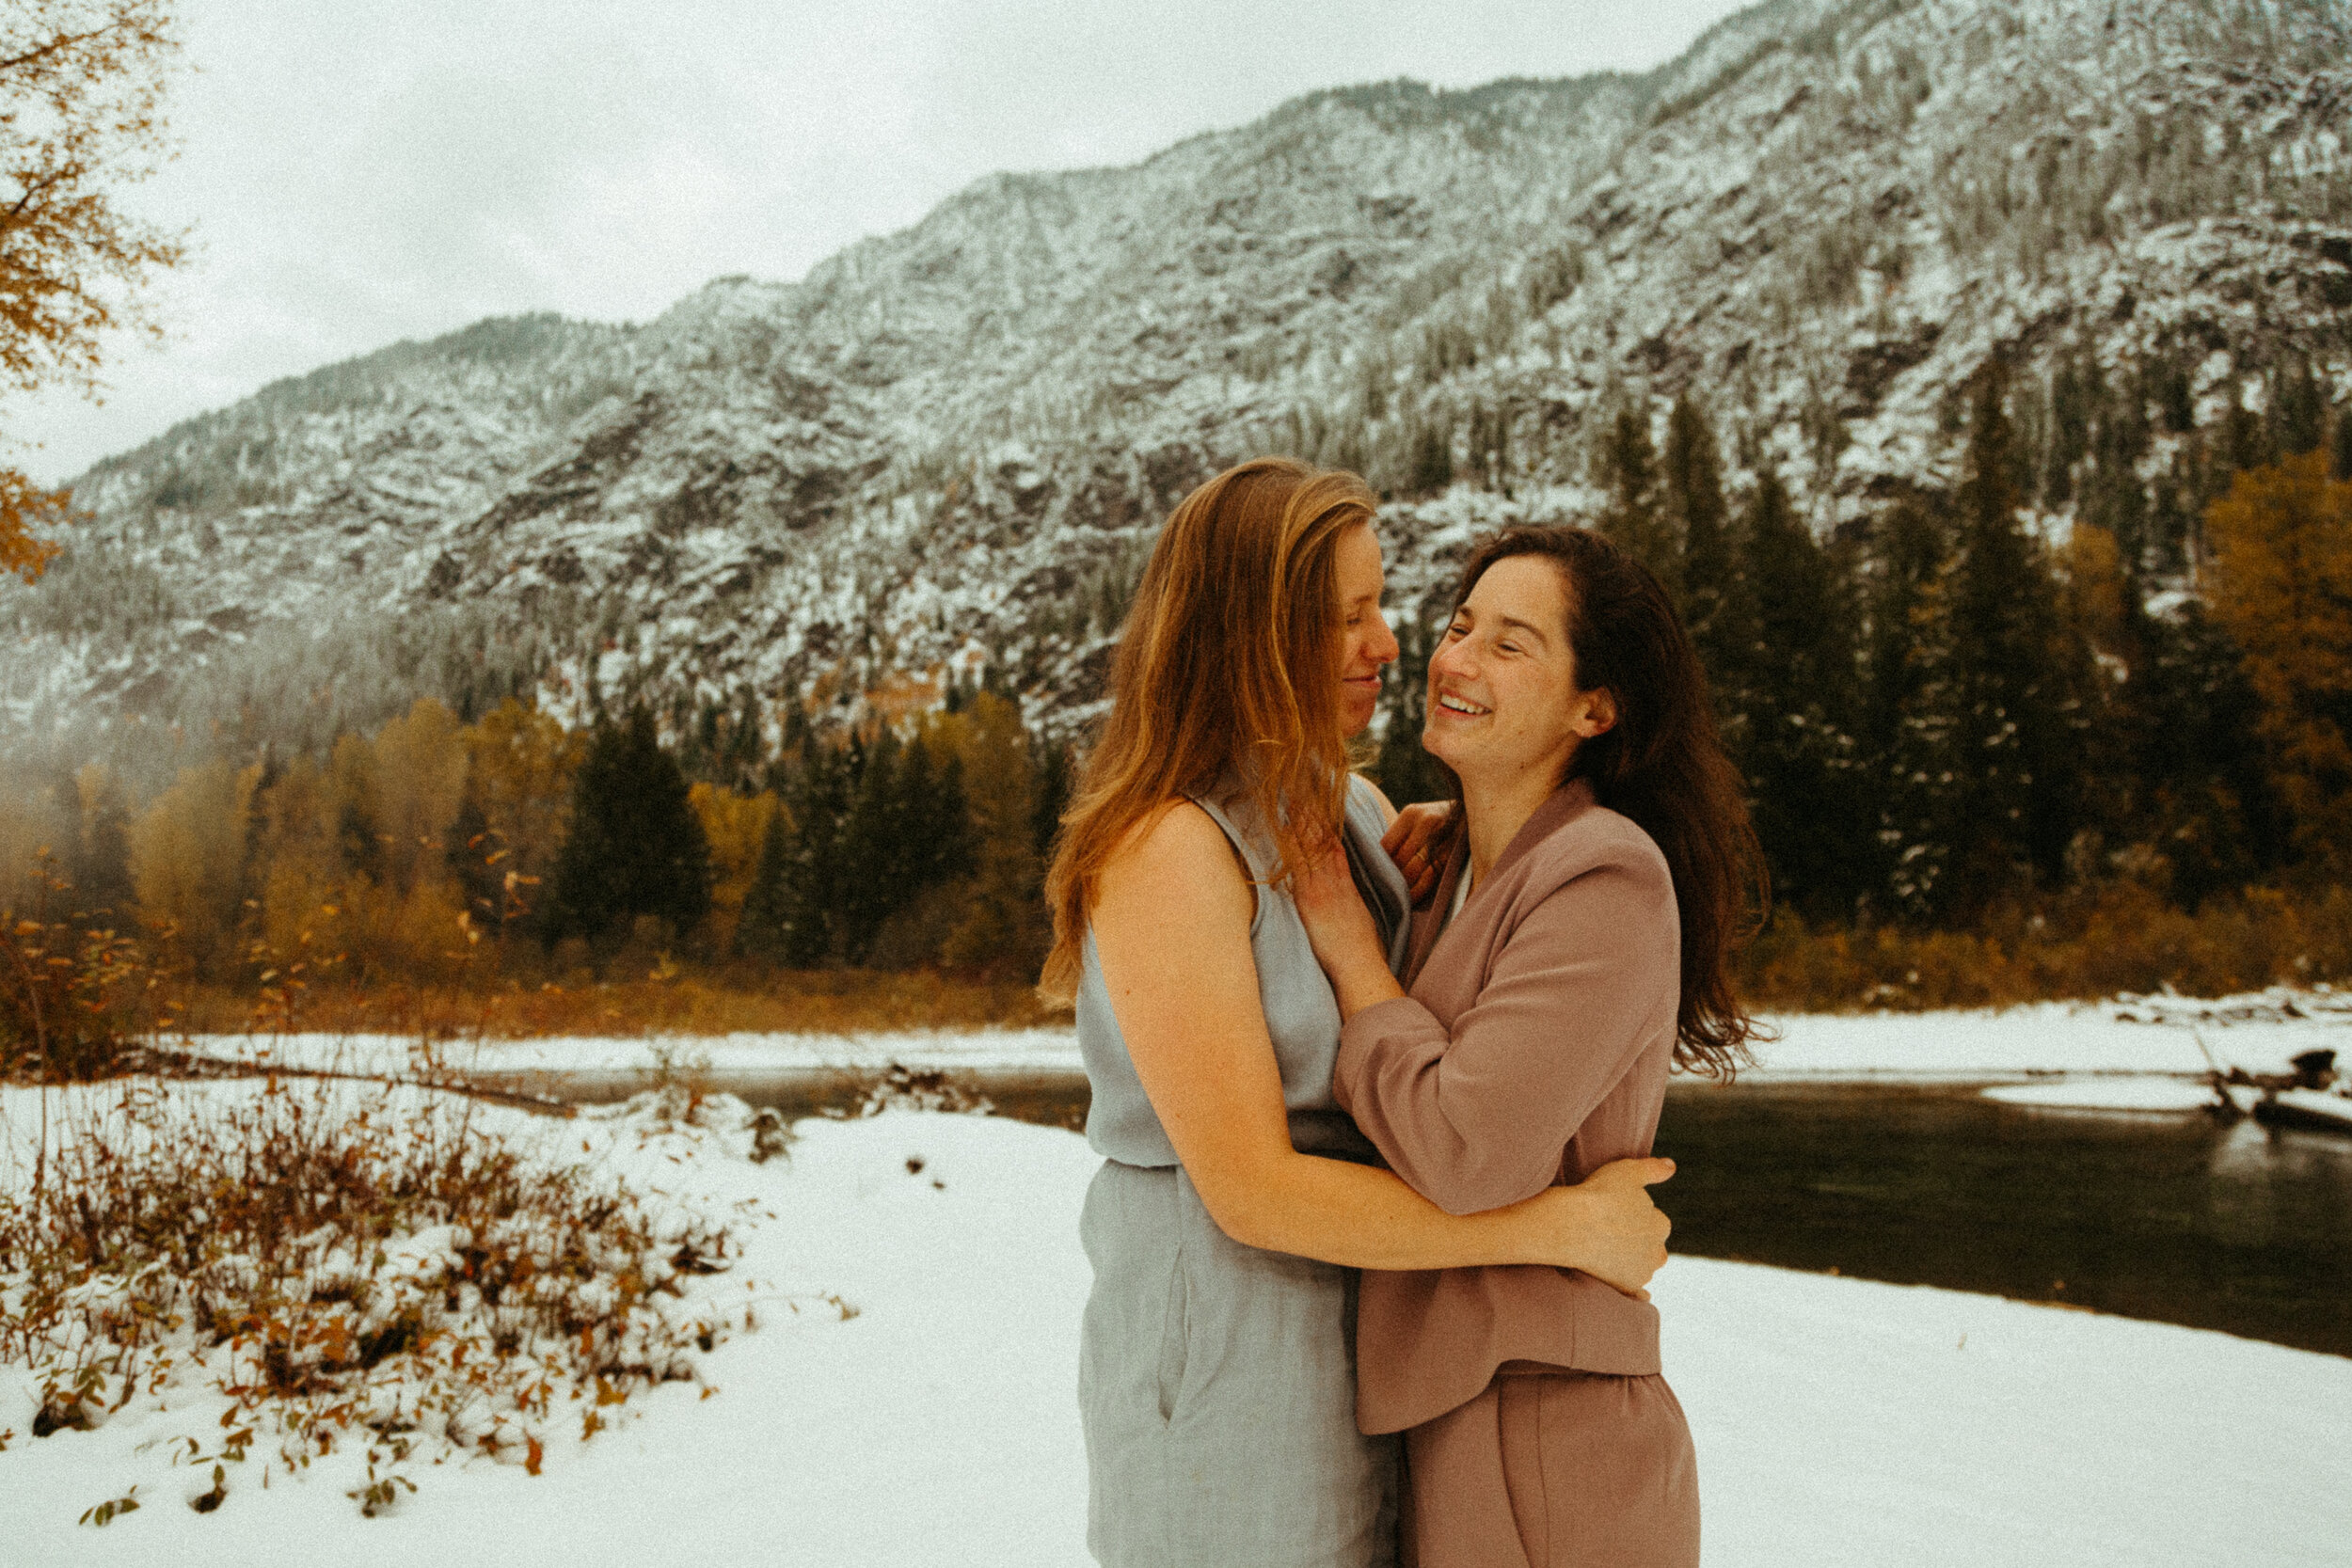 queer-gay-lesbian-trans-affirming-lgbtq-adventure-elopement-intimate-wedding-photographer-pnw-pacific-northwest-pnw-mountain-stream-forest-cowgay-tacoma-seattle-washington-portland-oregon-halle-roland-photography-non-binary-analog-film-artist-165-229.jpg